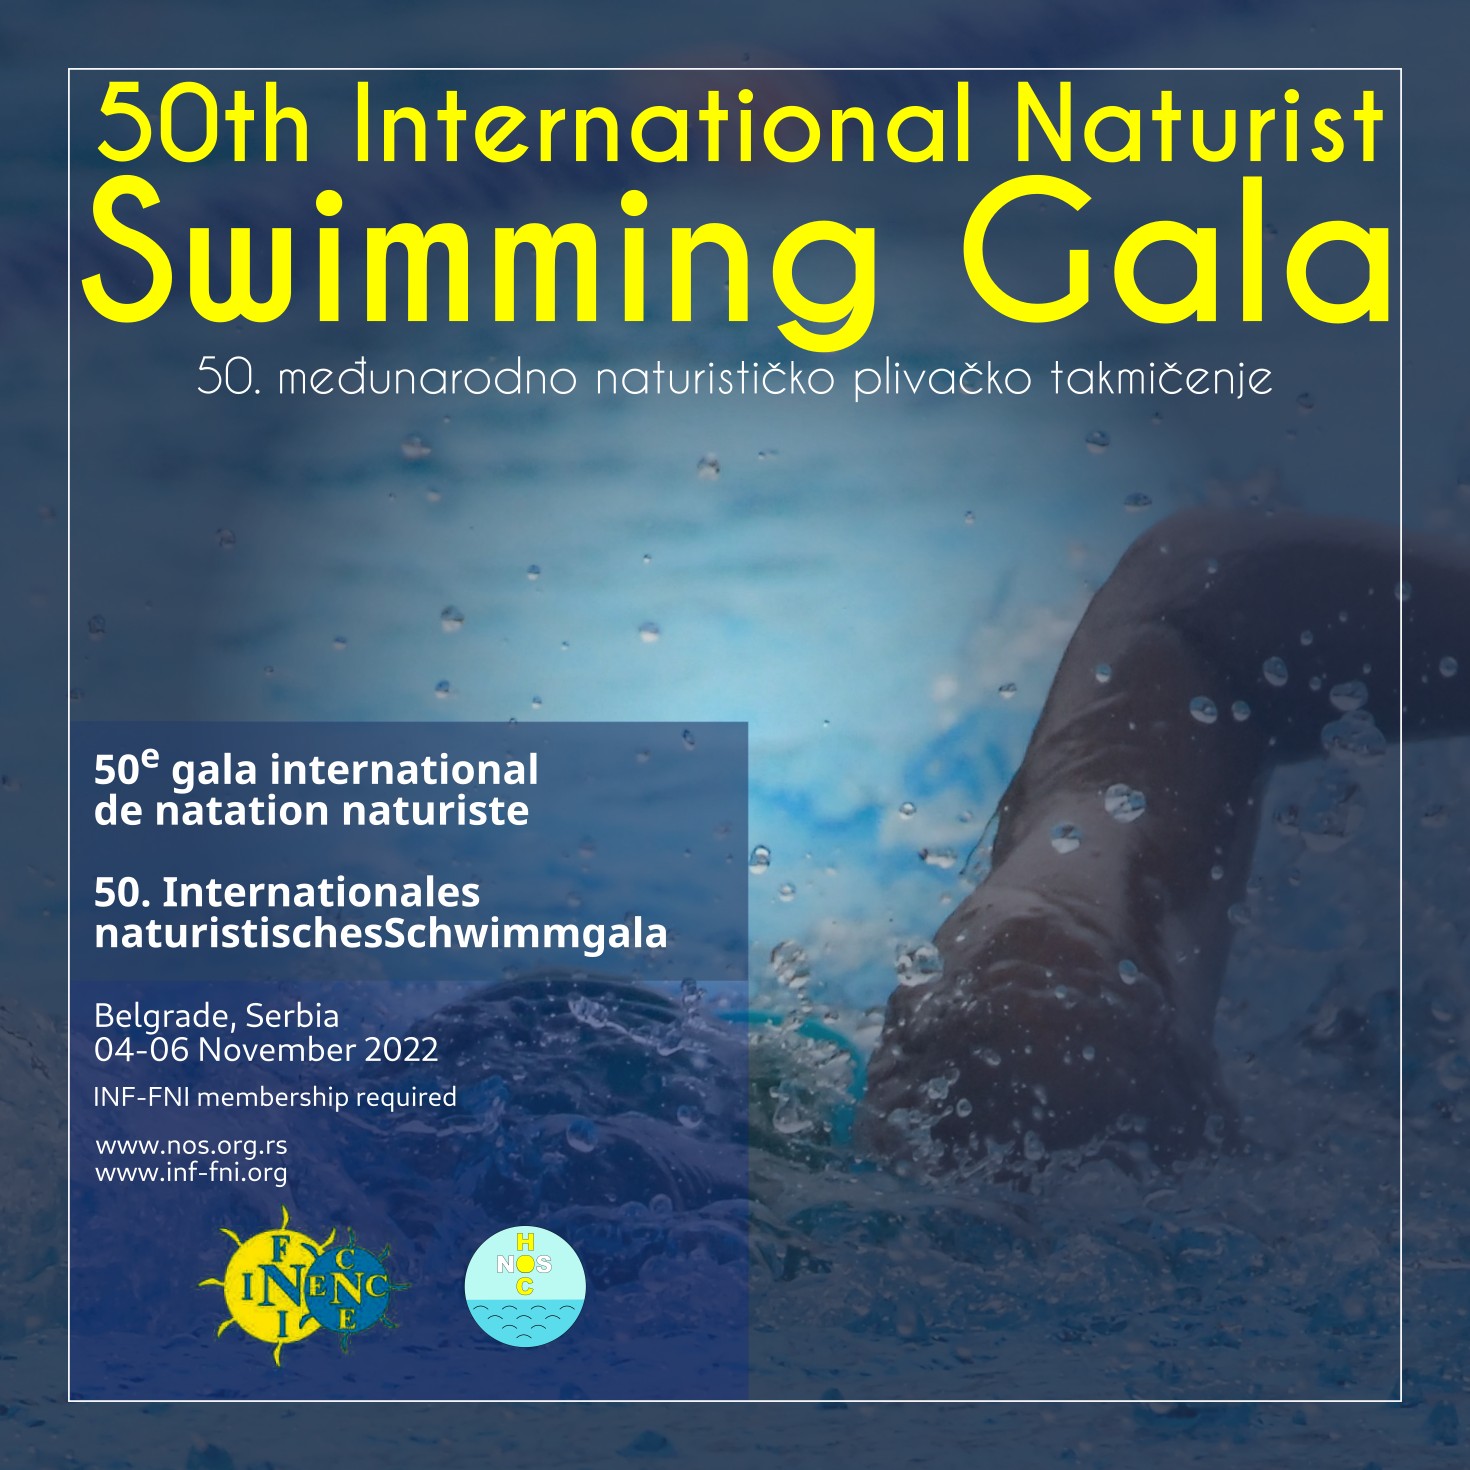 Belgrade is the host of the 2022 Swimming Gala international naturistic swimming competition